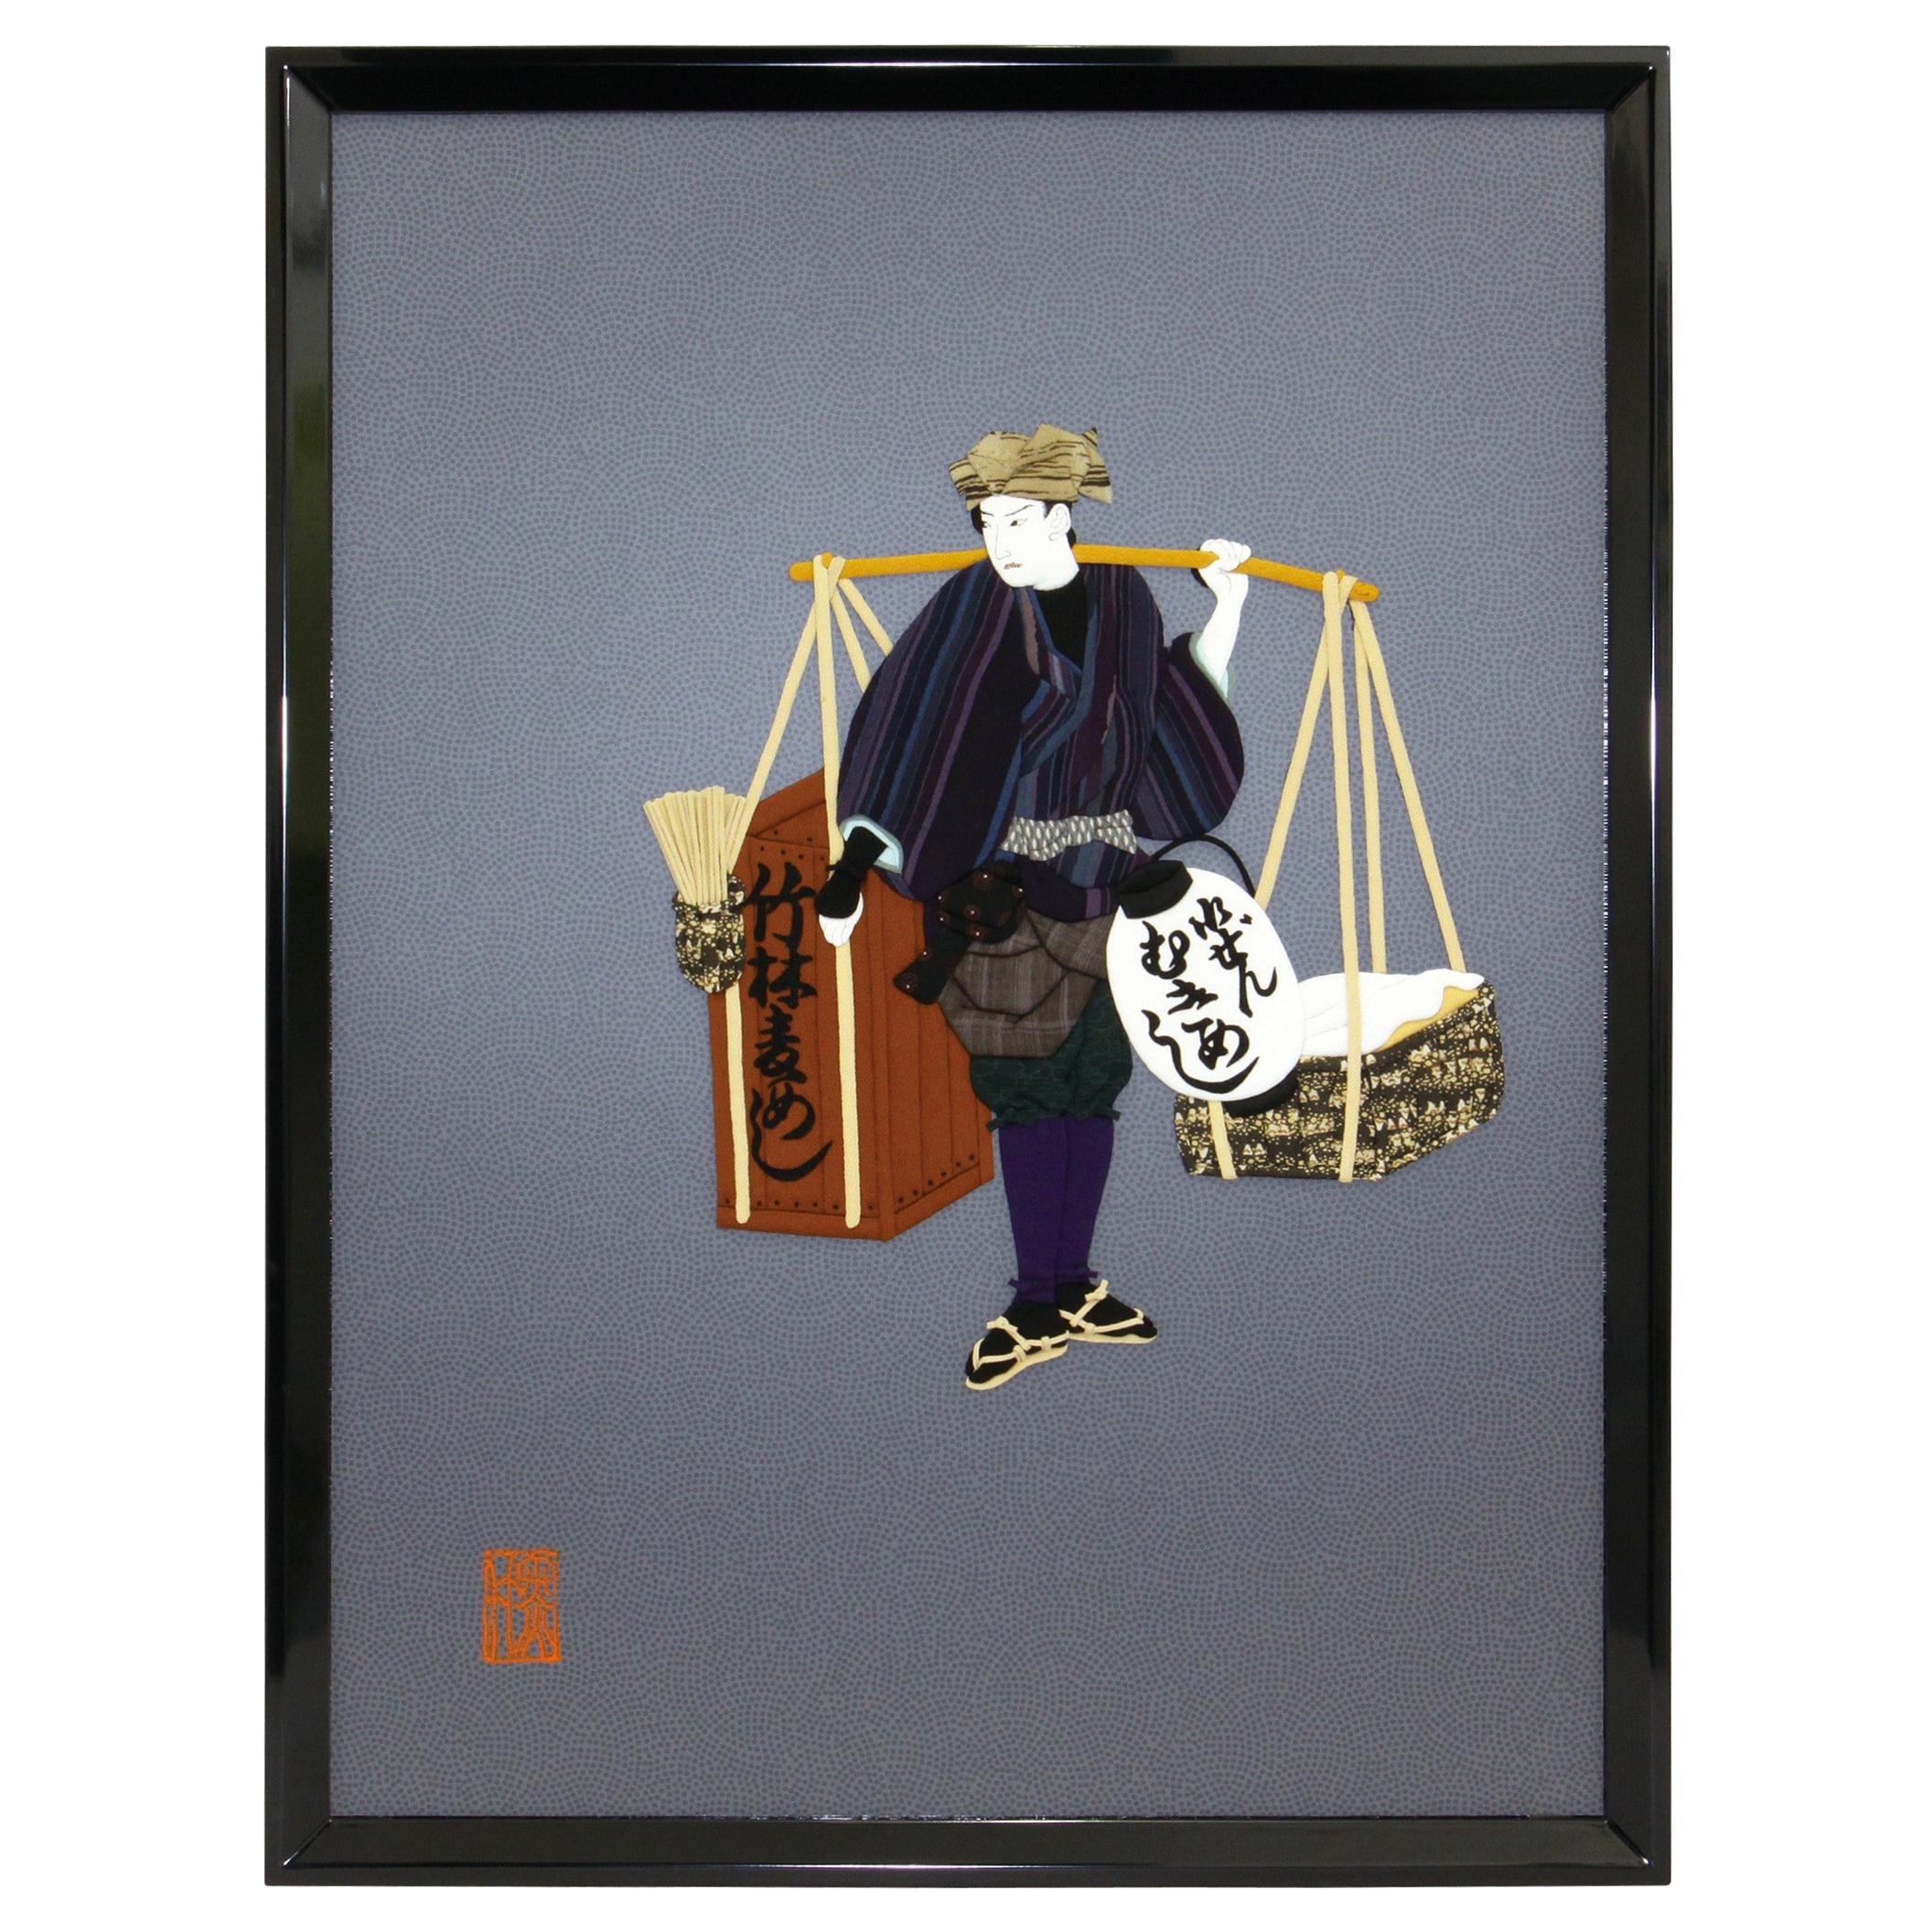 Large Contemporary Japanese Black Brown Oshie Wall Decorative Art, Framed